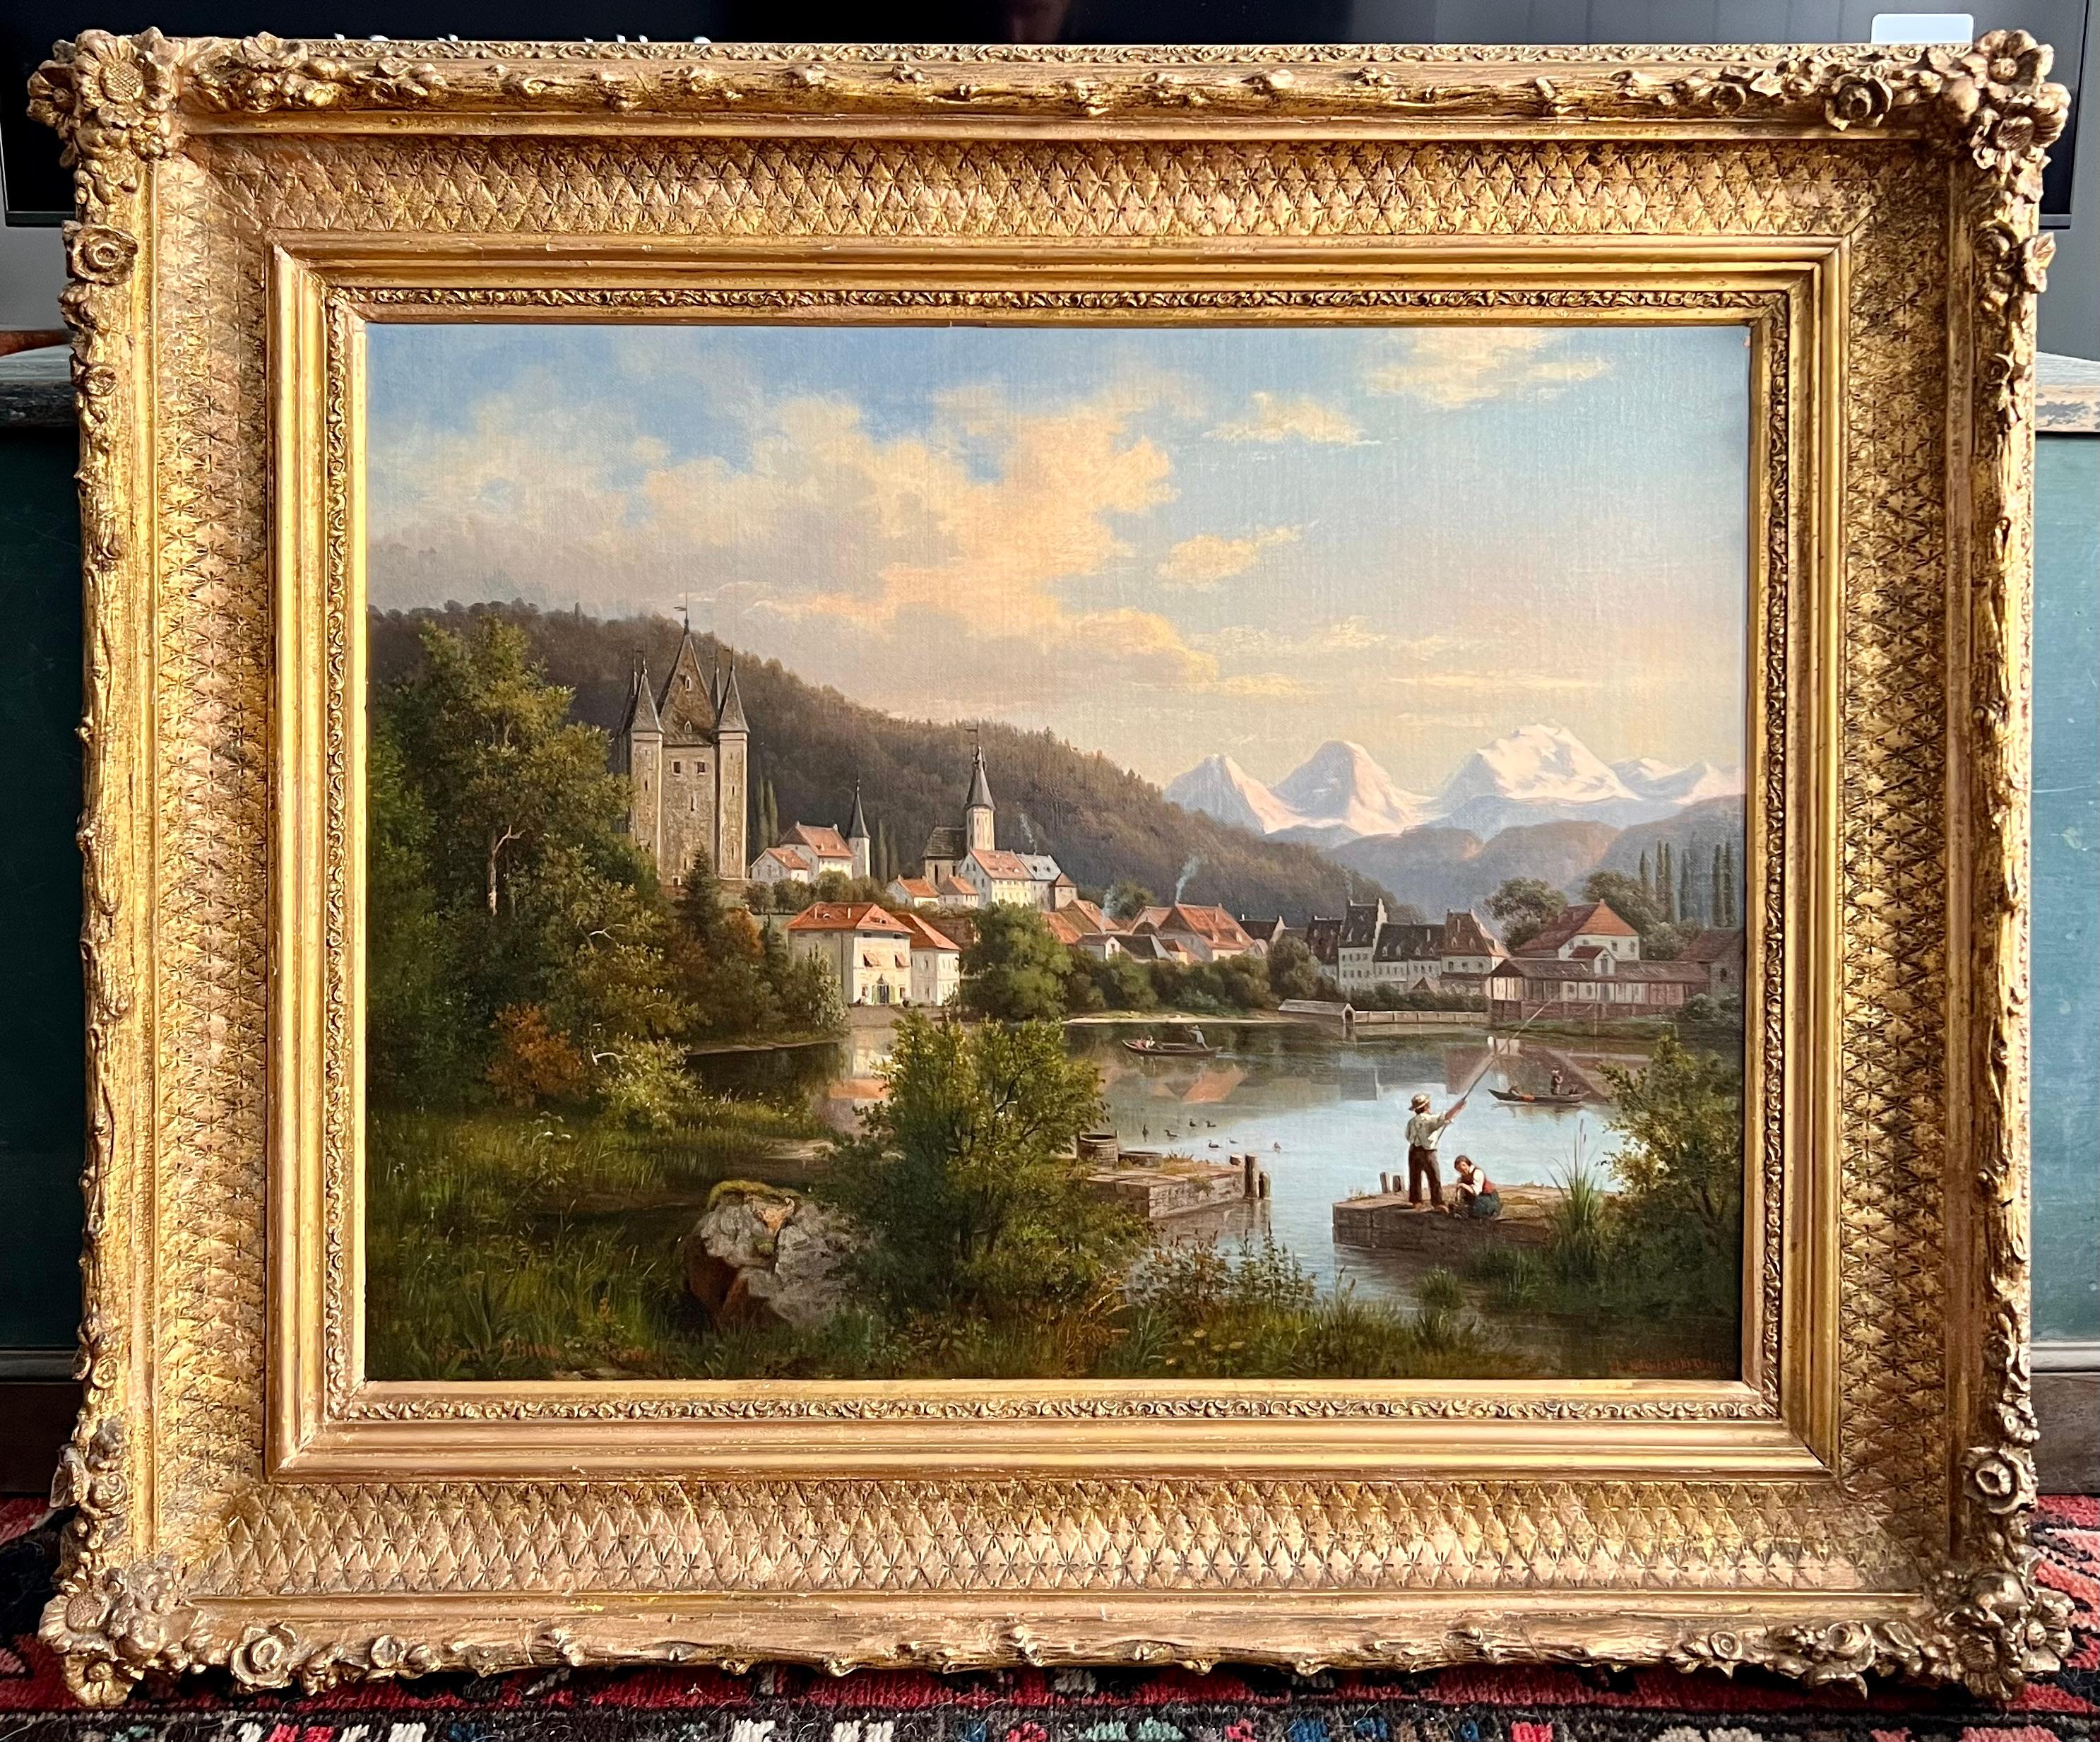 Henry Lewis, 1819-1904
Oil on canvas, City of Thun in Switzerland, Stadt Thun im Schweiz, City of Thun in Switzerland
Signed and dated H. Lewis 1861 Dusseldorf in the lower right and inscribed as titled in the lower left. 
Measures 21.75